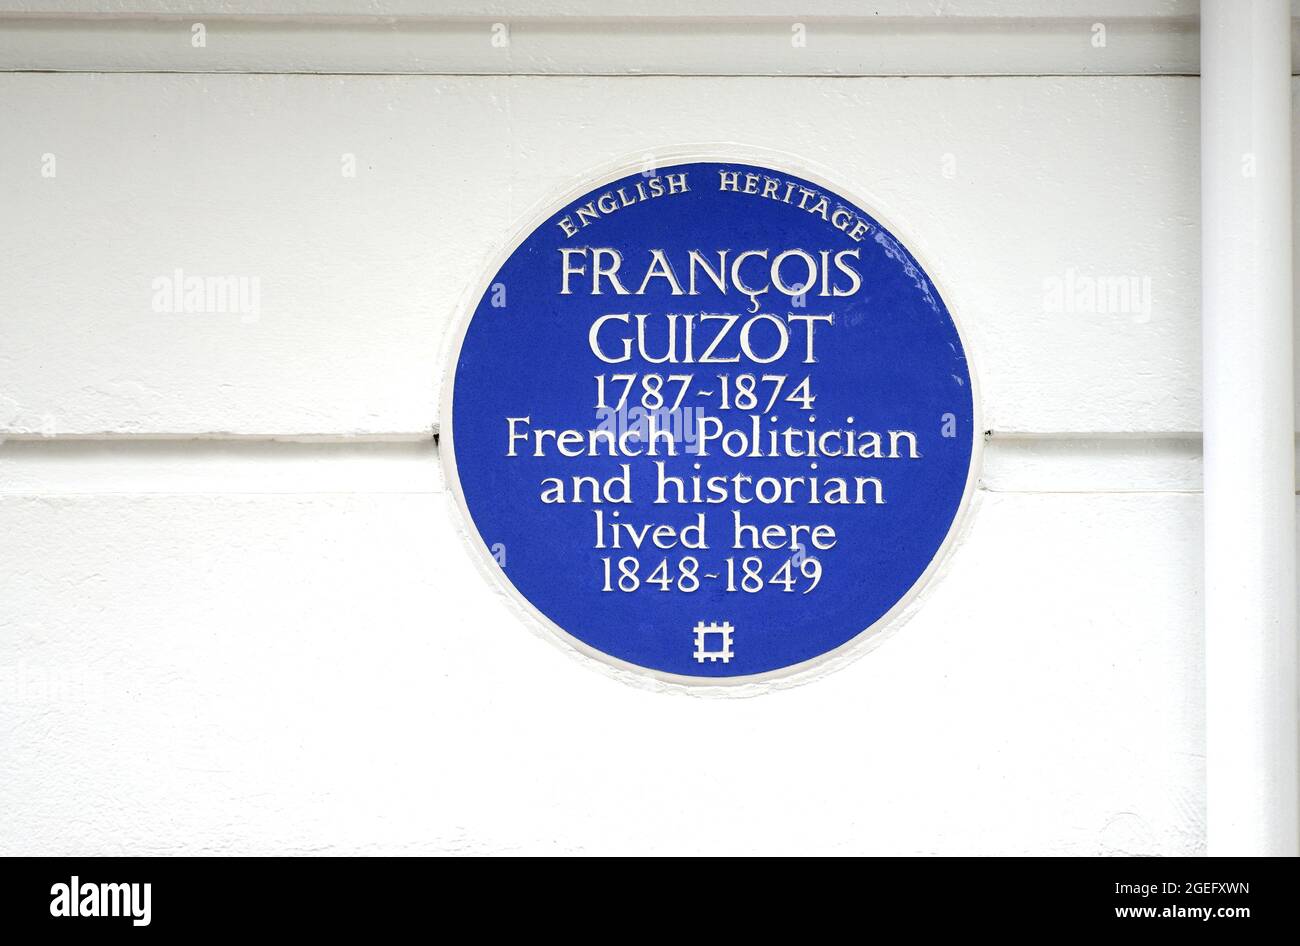 London, UK. Commemorative plaque: 'François Guizot 1787-1874 French politician and historian lived here 1848-1849' at 21 Pelham Crescent, SW7 Stock Photo